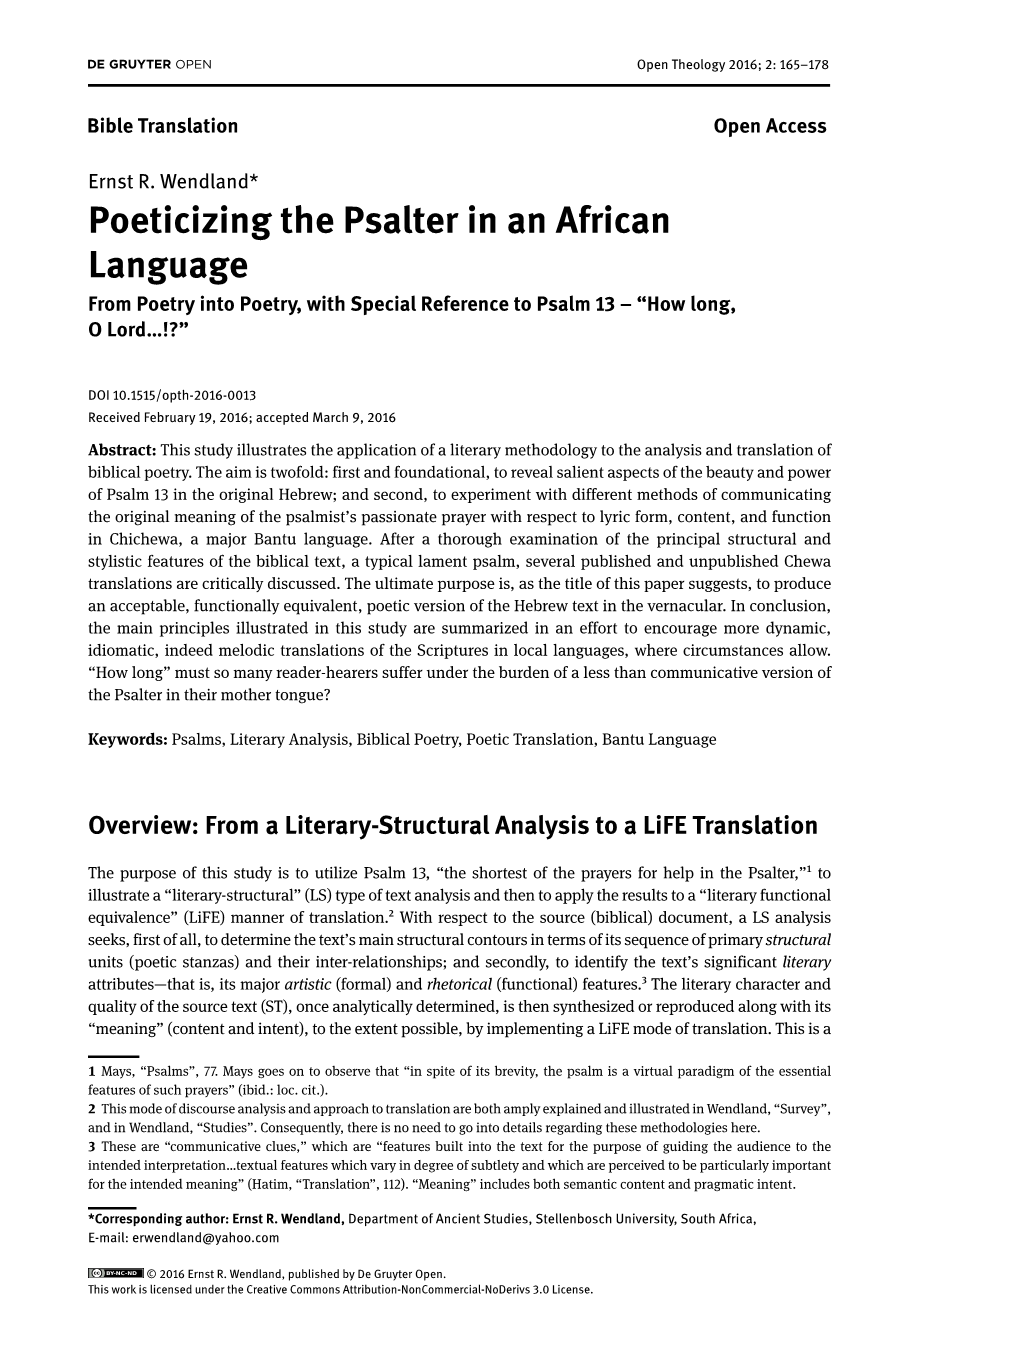 Poeticizing the Psalter in an African Language from Poetry Into Poetry, with Special Reference to Psalm 13 – “How Long, O Lord…!?”